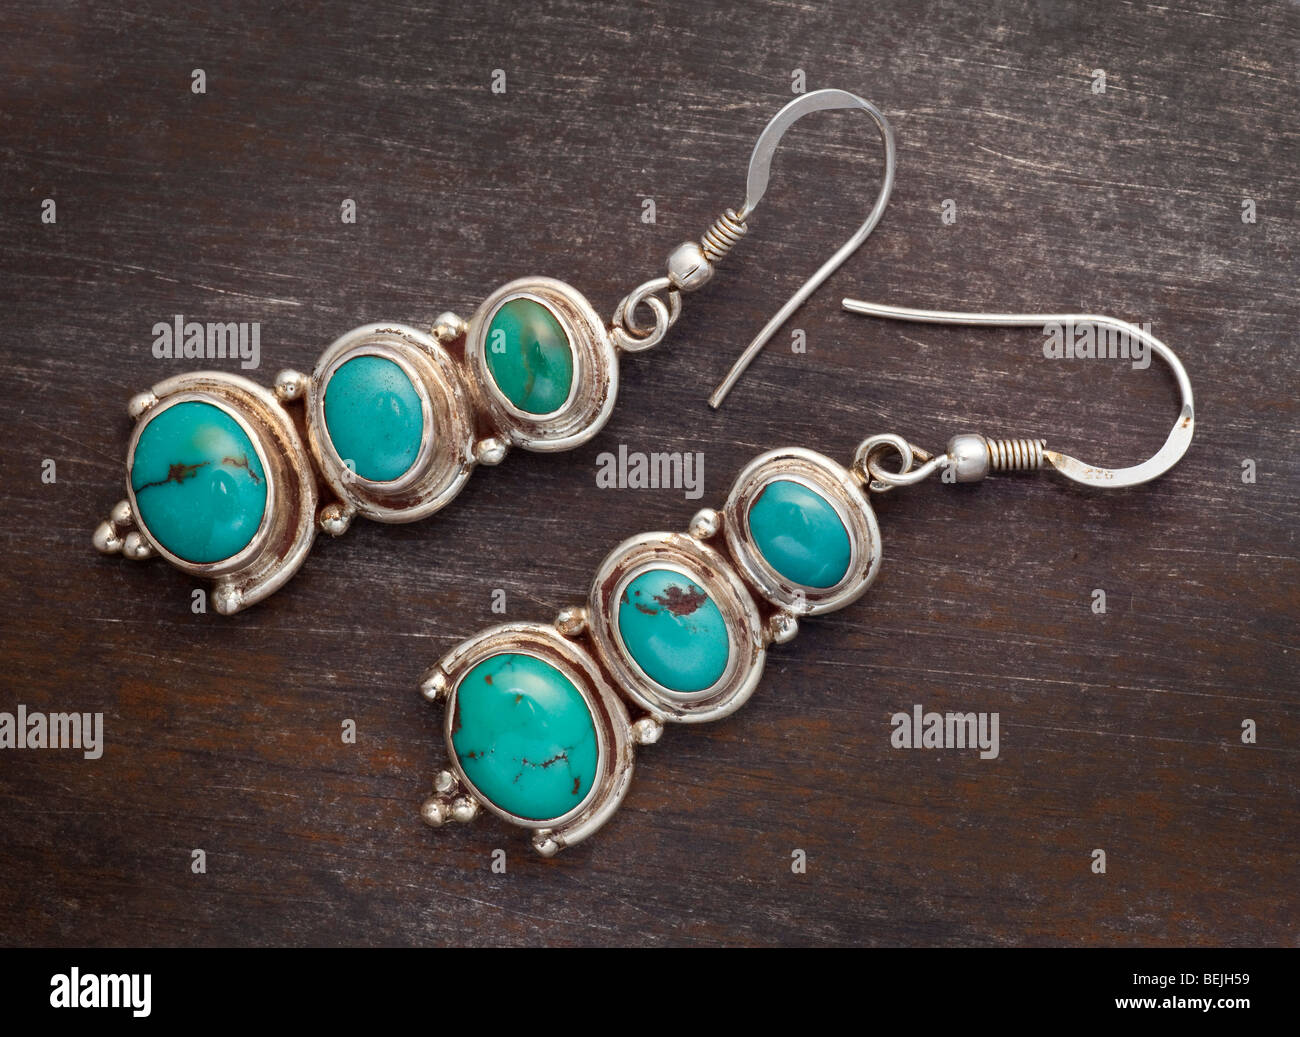 Turquoise and silver earings Stock Photo